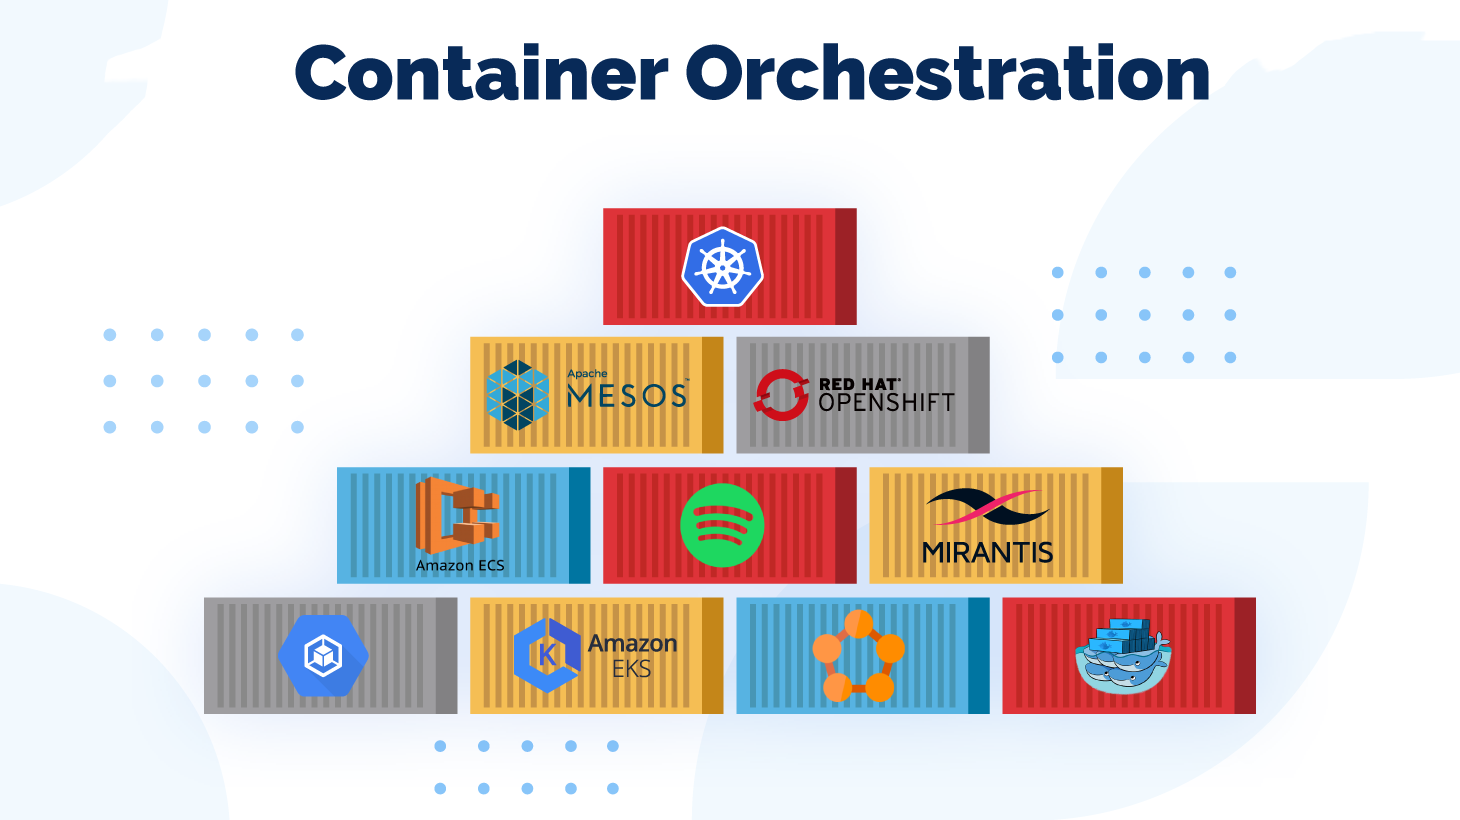 So sánh các công cụ Container Orchestration